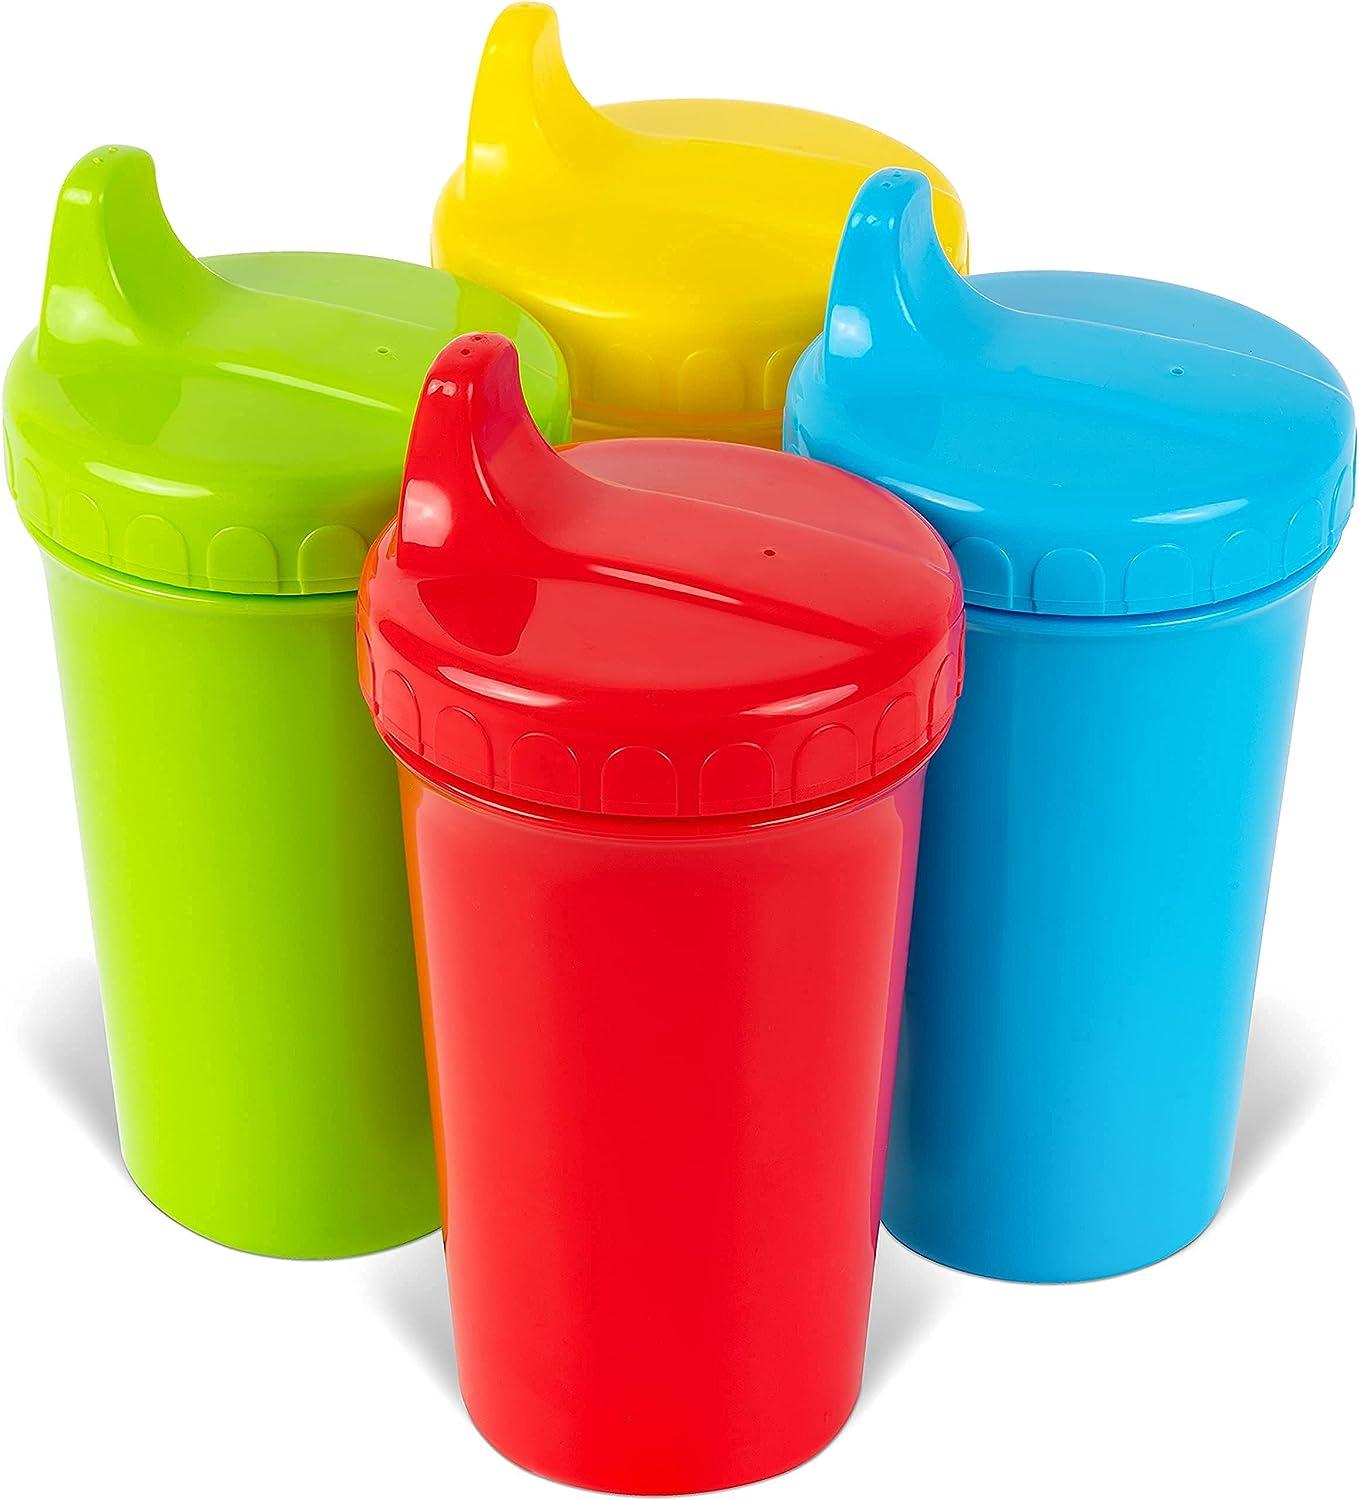 Re Play Made in USA 10 Oz. Sippy Cups for Toddlers (4-pack) Spill